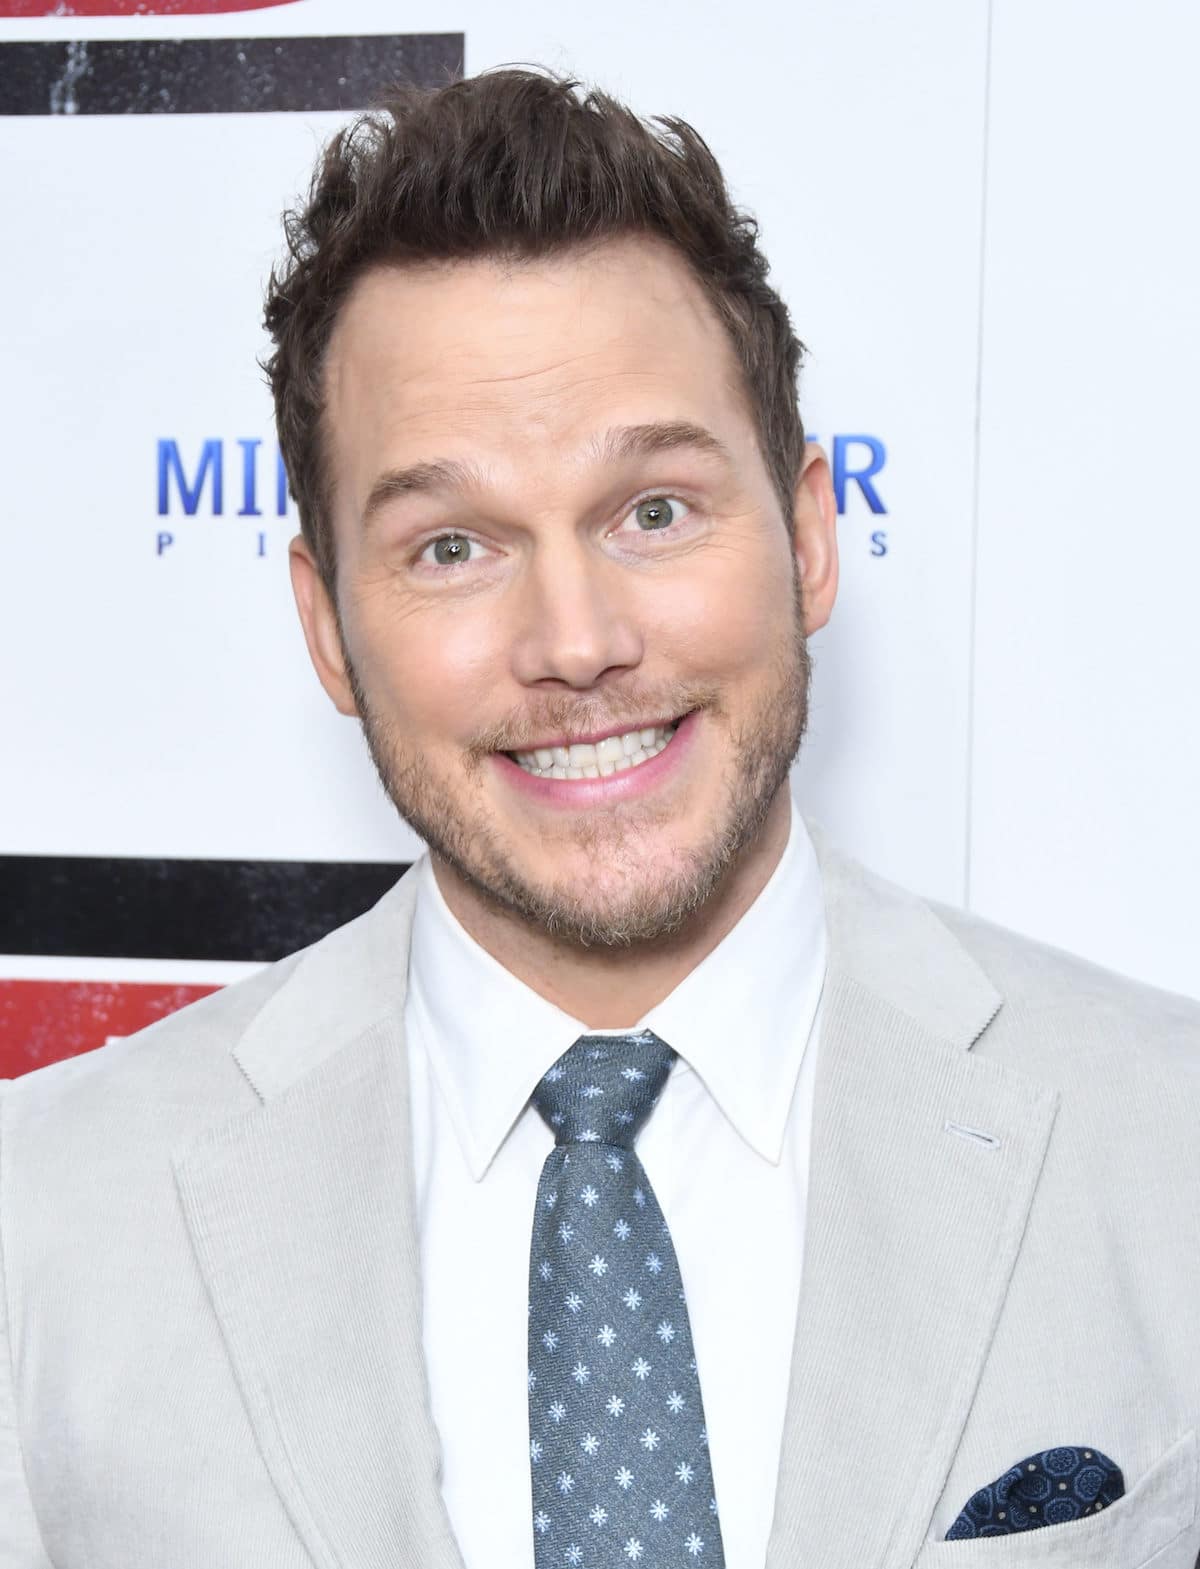 chris pratt jokes with photographers as he hunks out grey suit at